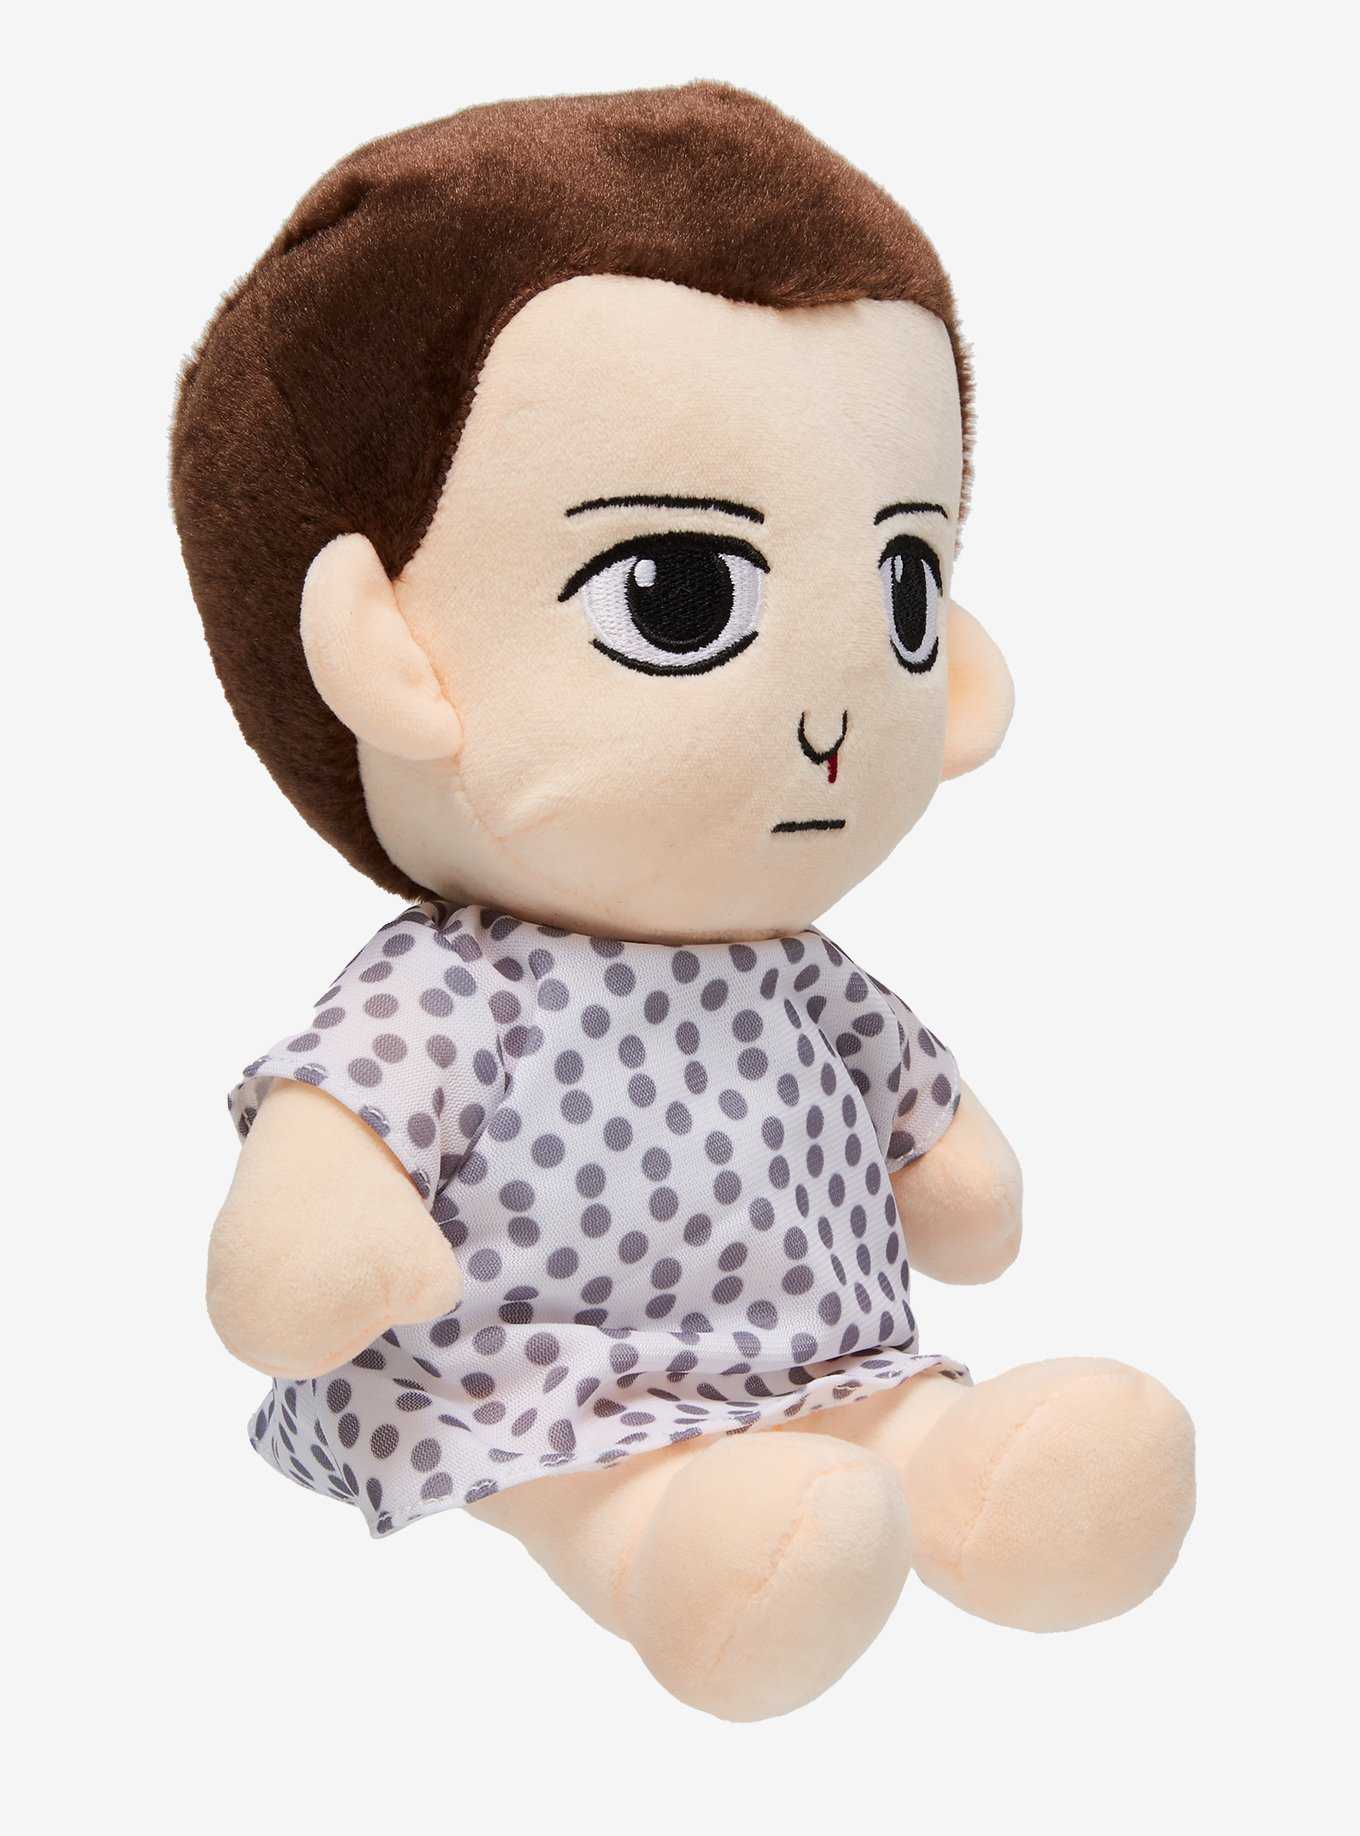 Stranger Things Eleven in Gown 8 Inch Plush, , hi-res